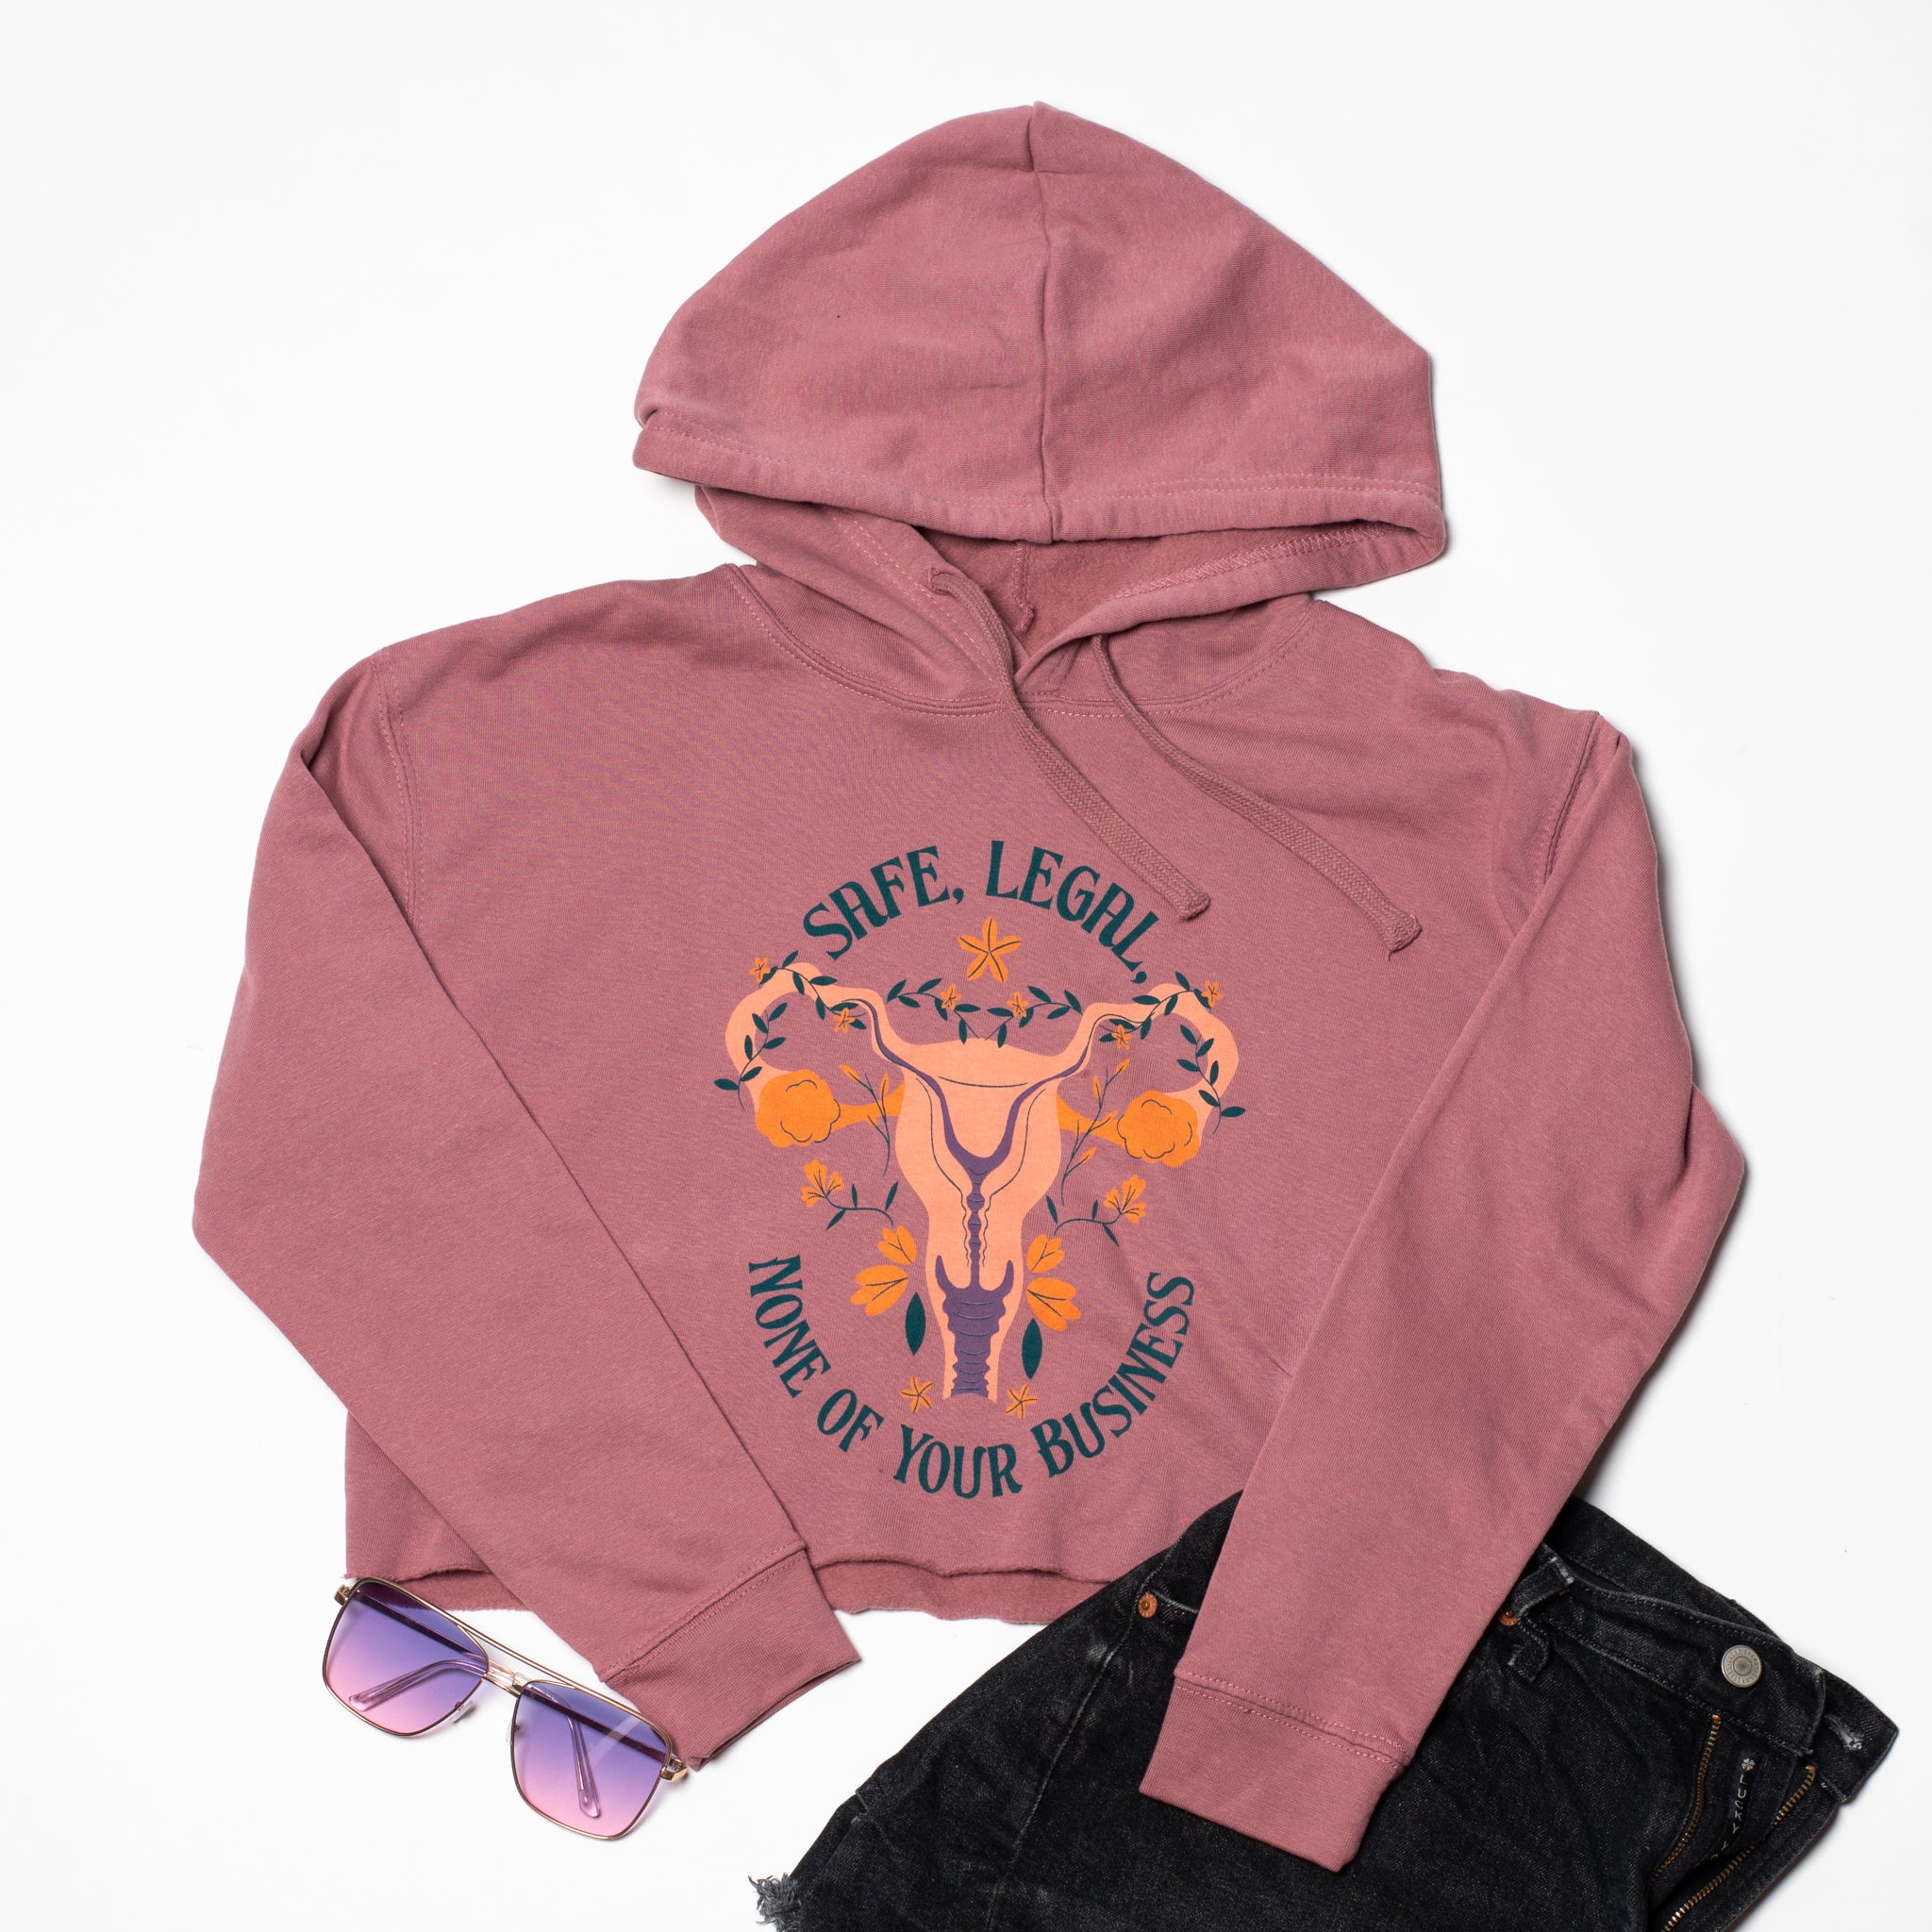 Safe, Legal, and None of Your Business Crop Hoodie